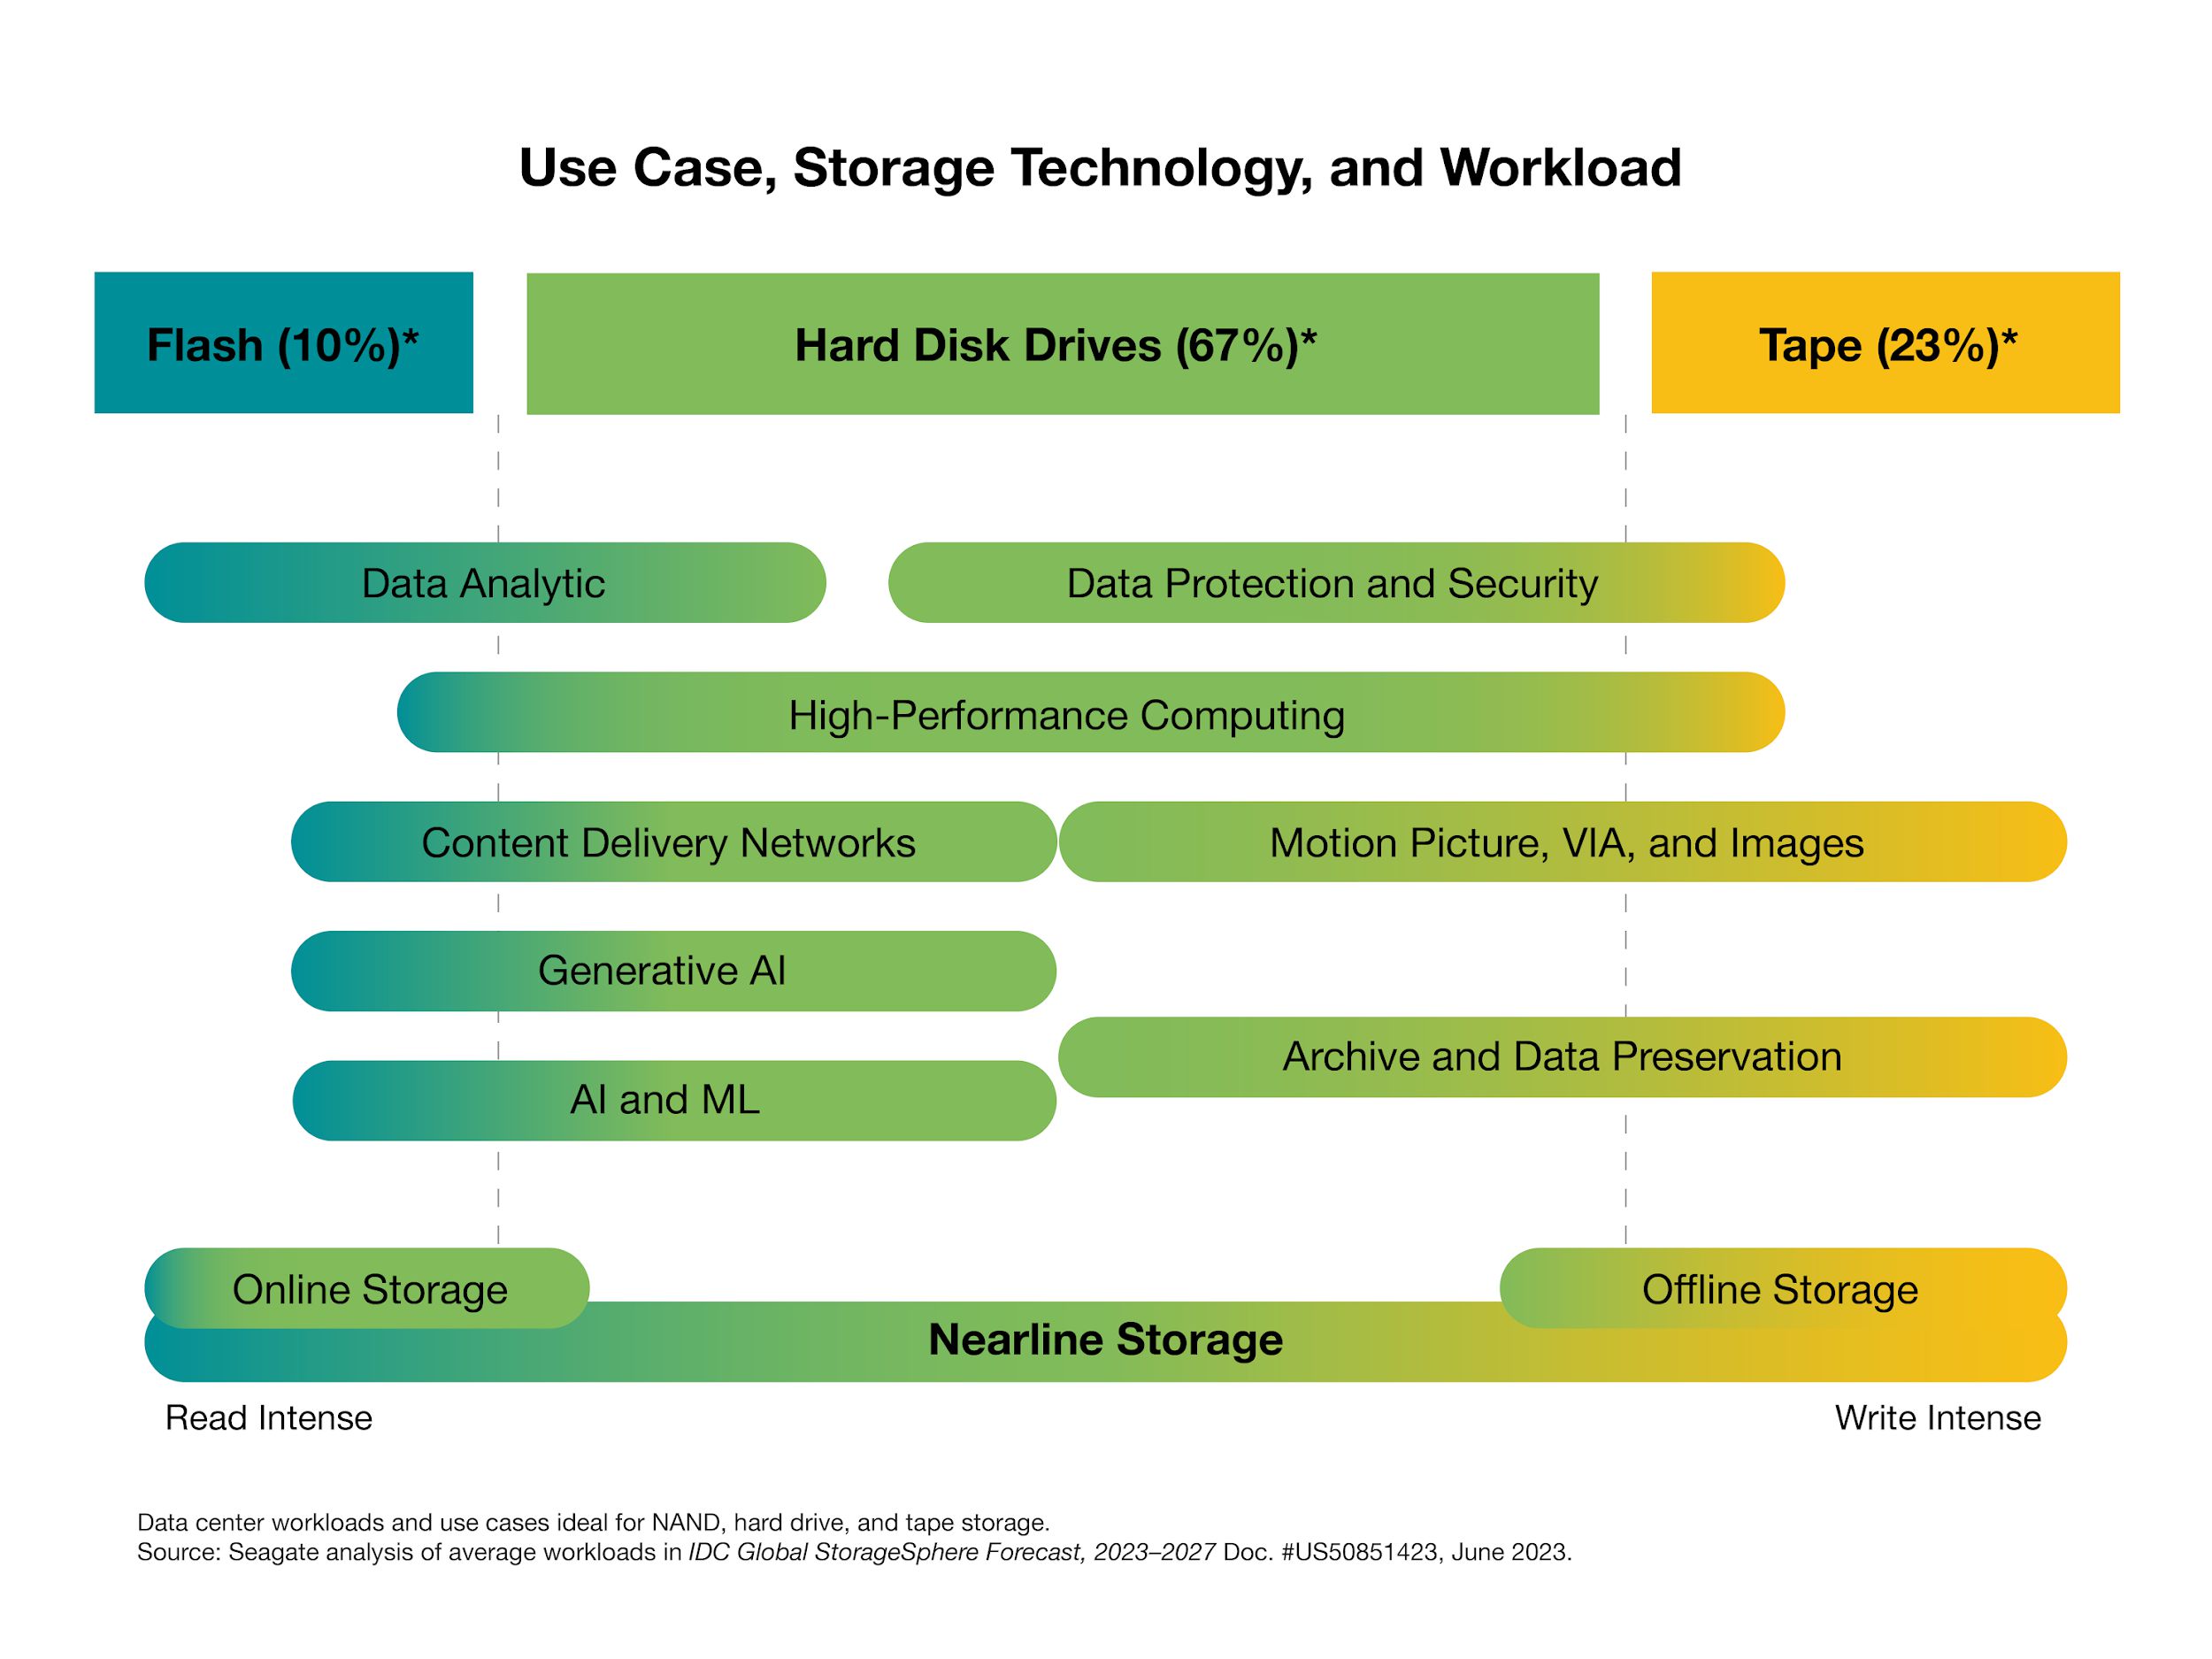 Use Case Storage Technology and Workload